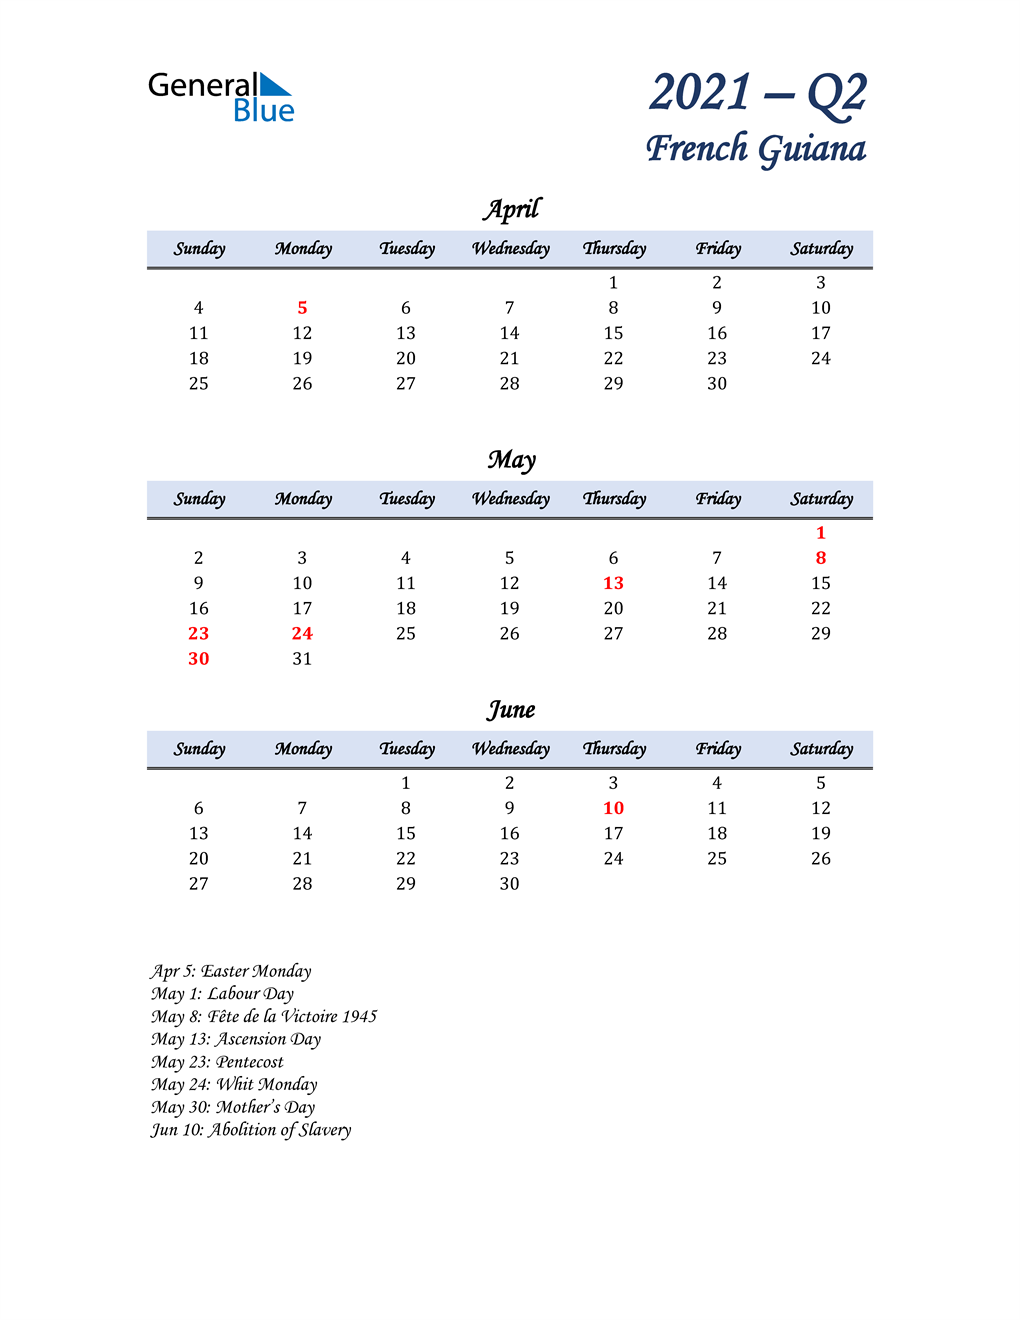  April, May, and June Calendar for French Guiana